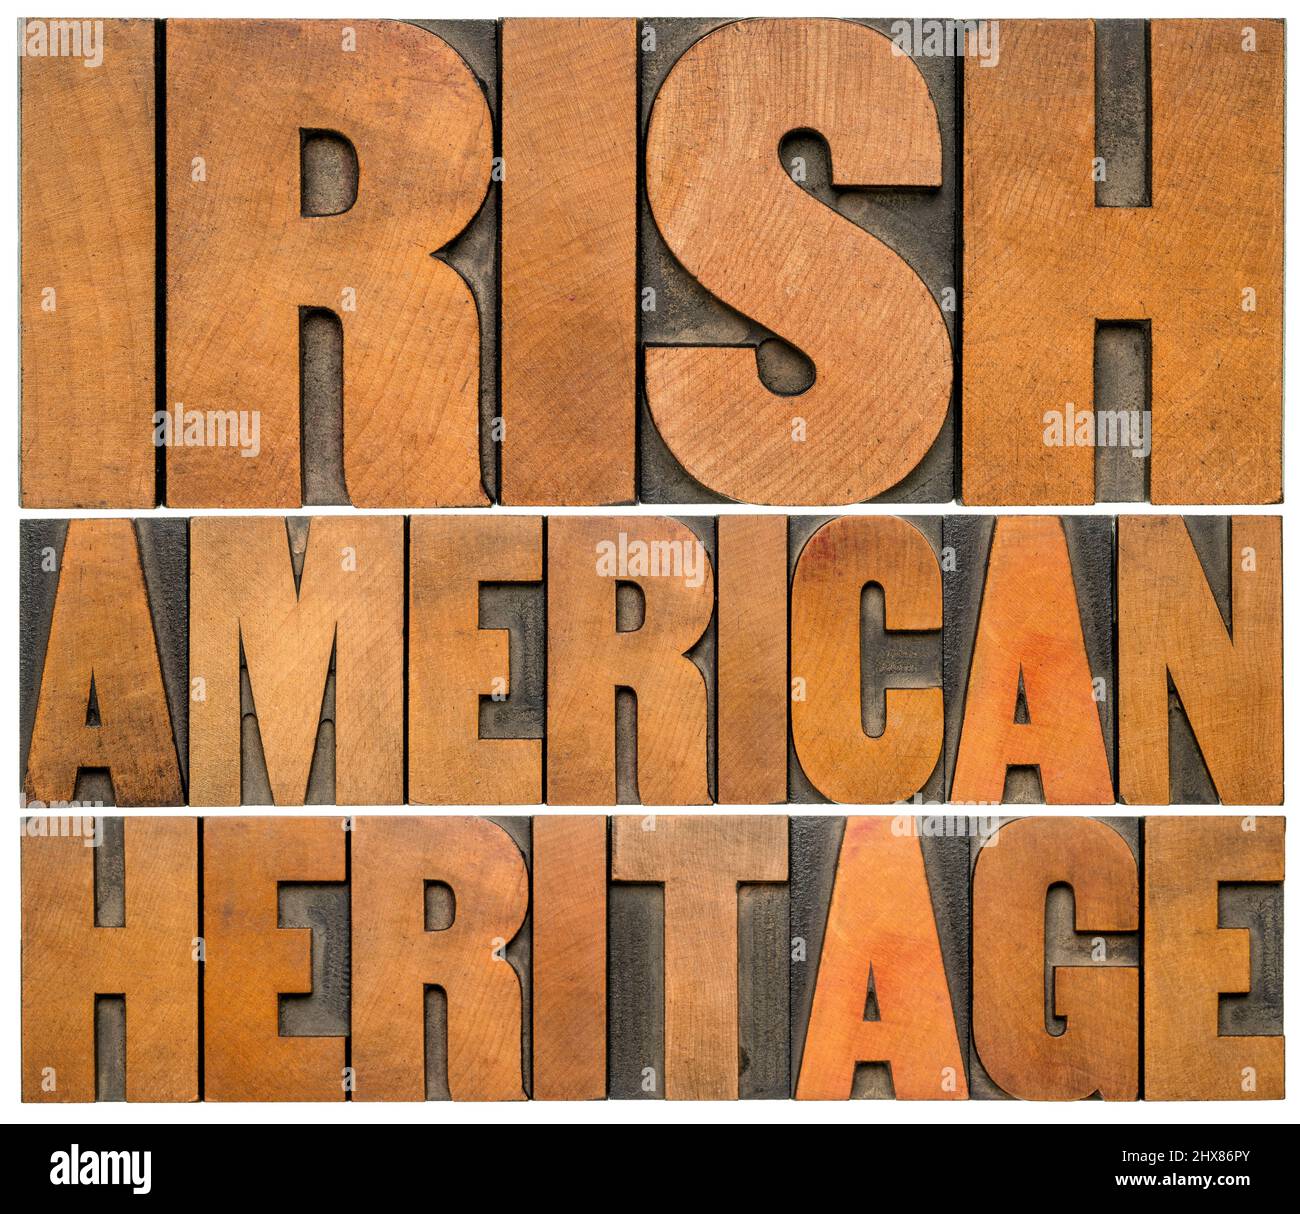 Irish American heritage - isolated word abstract in vintage letterpress wood type, reminder of cultural event Stock Photo